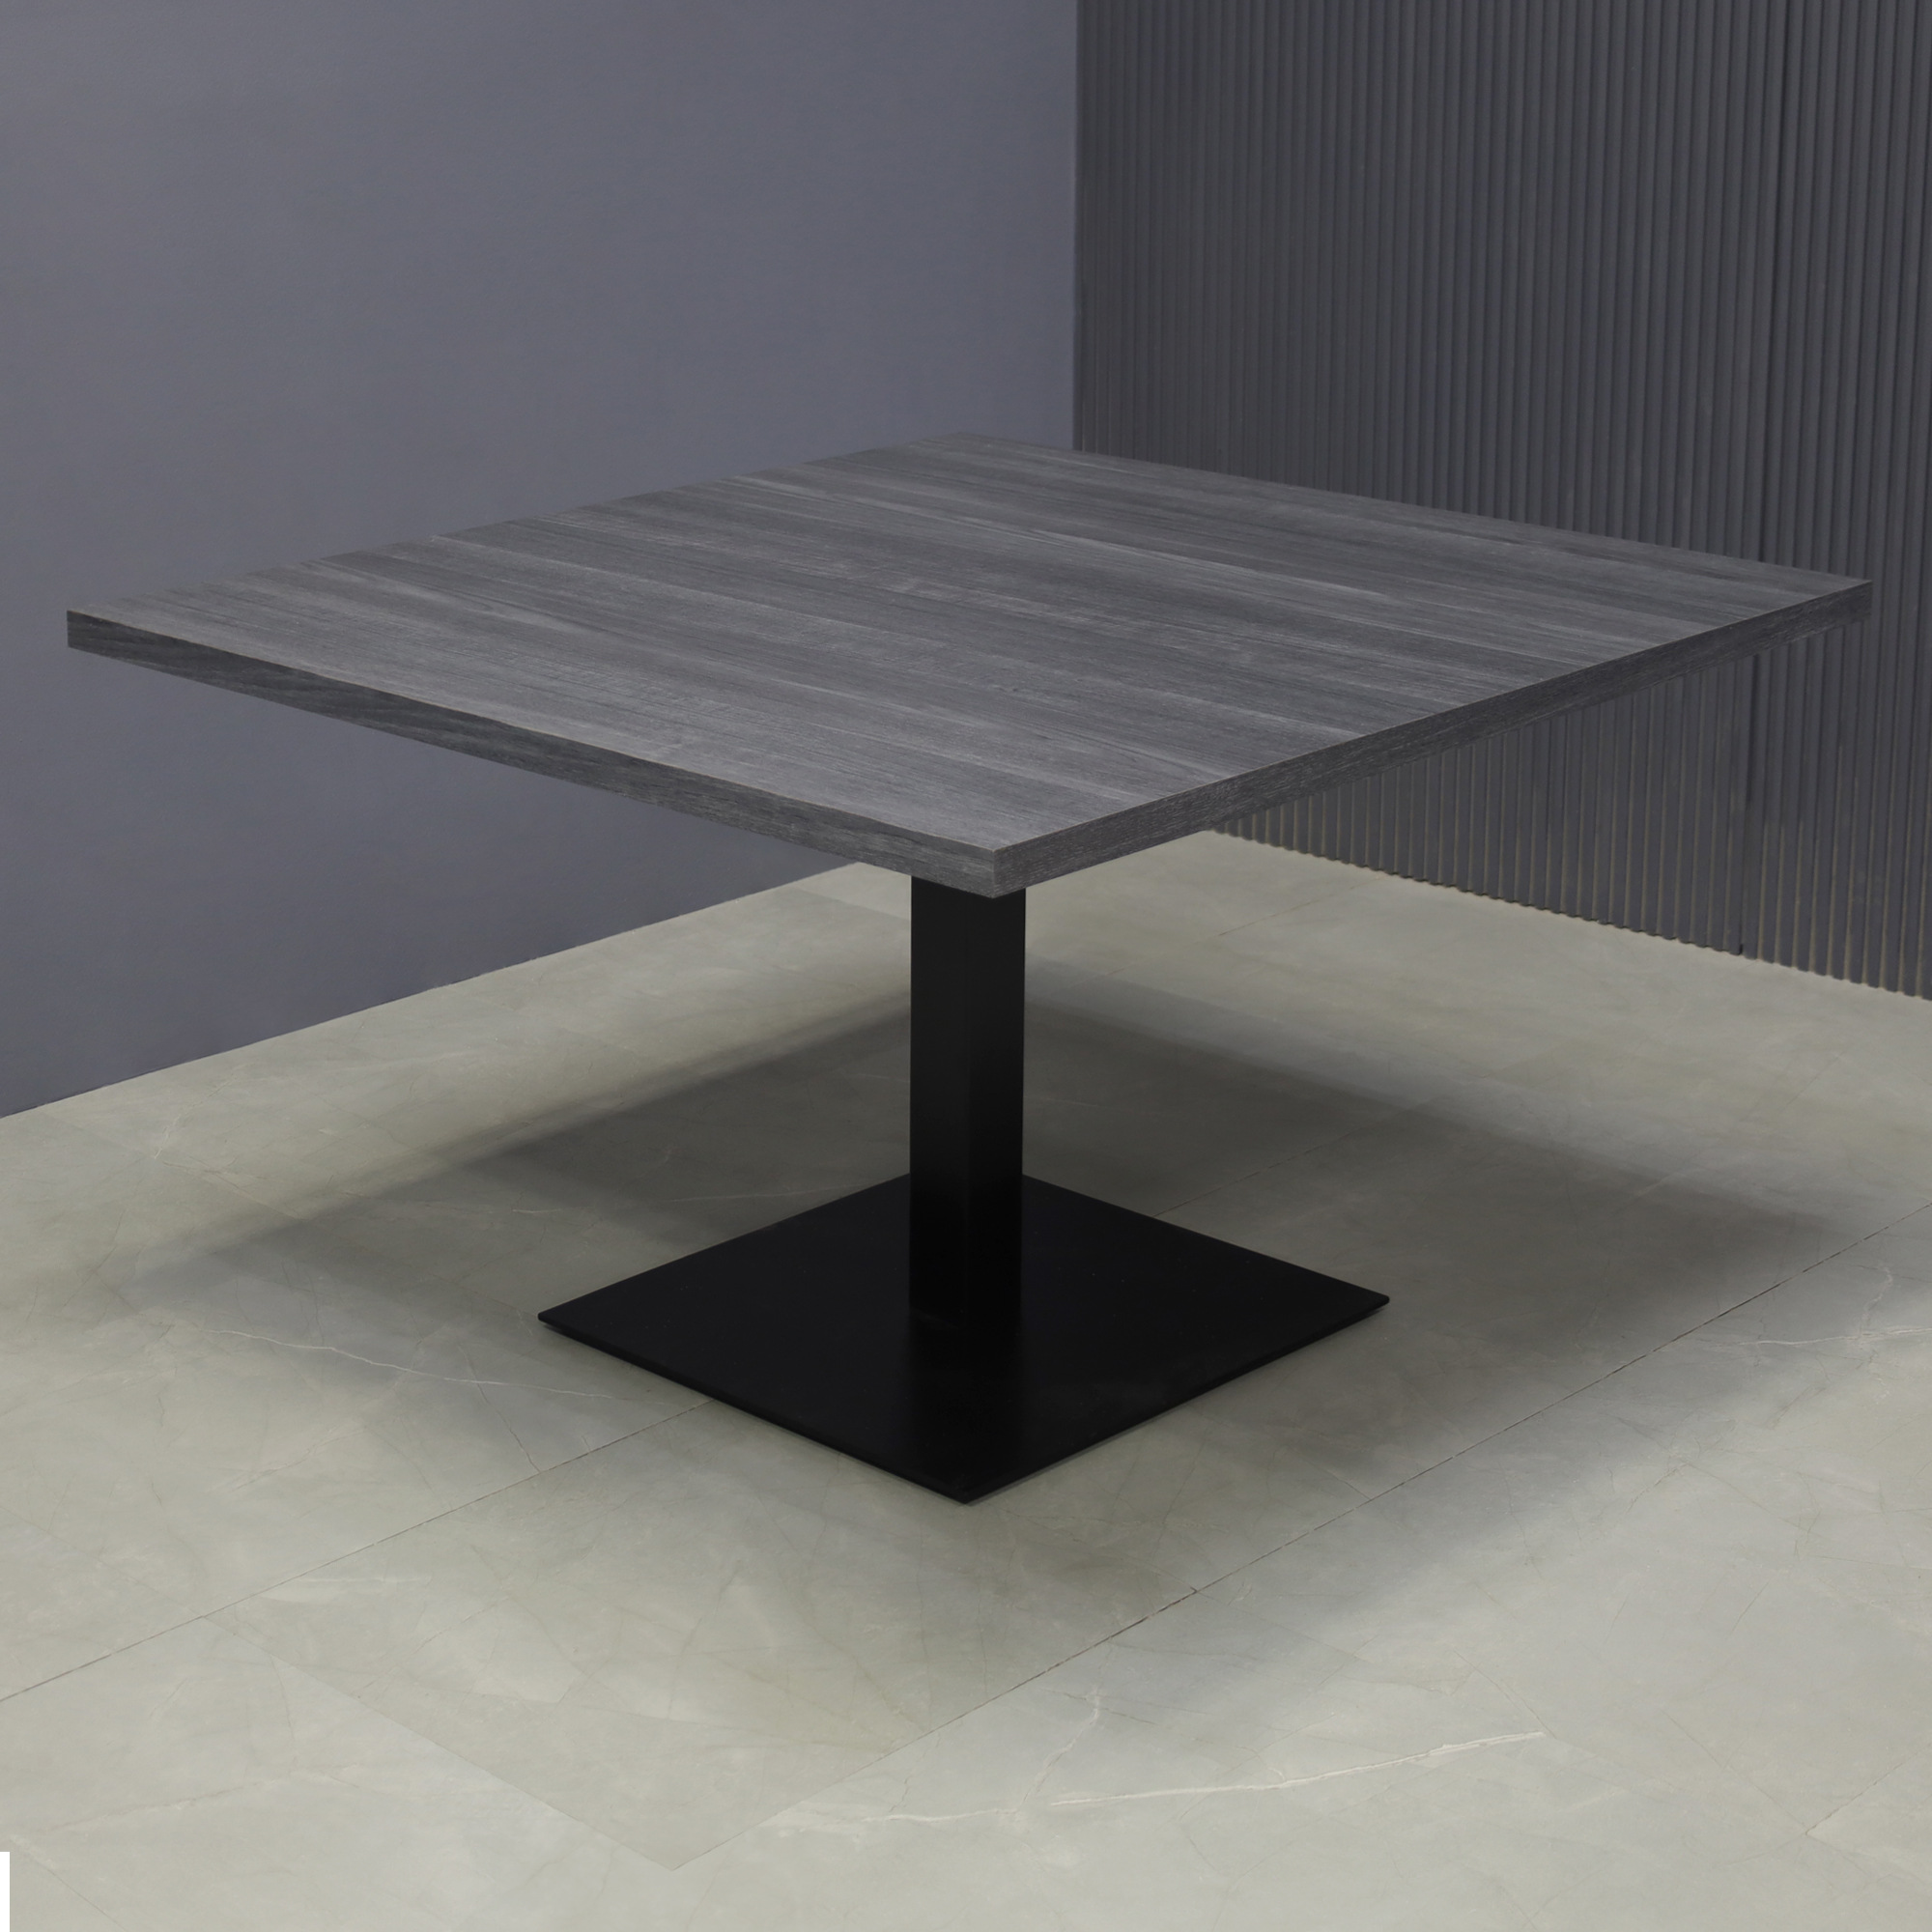 48-inch California Square Conference Table with Laminate Top in storm teakwood matte and black stainless steel base, shown here.